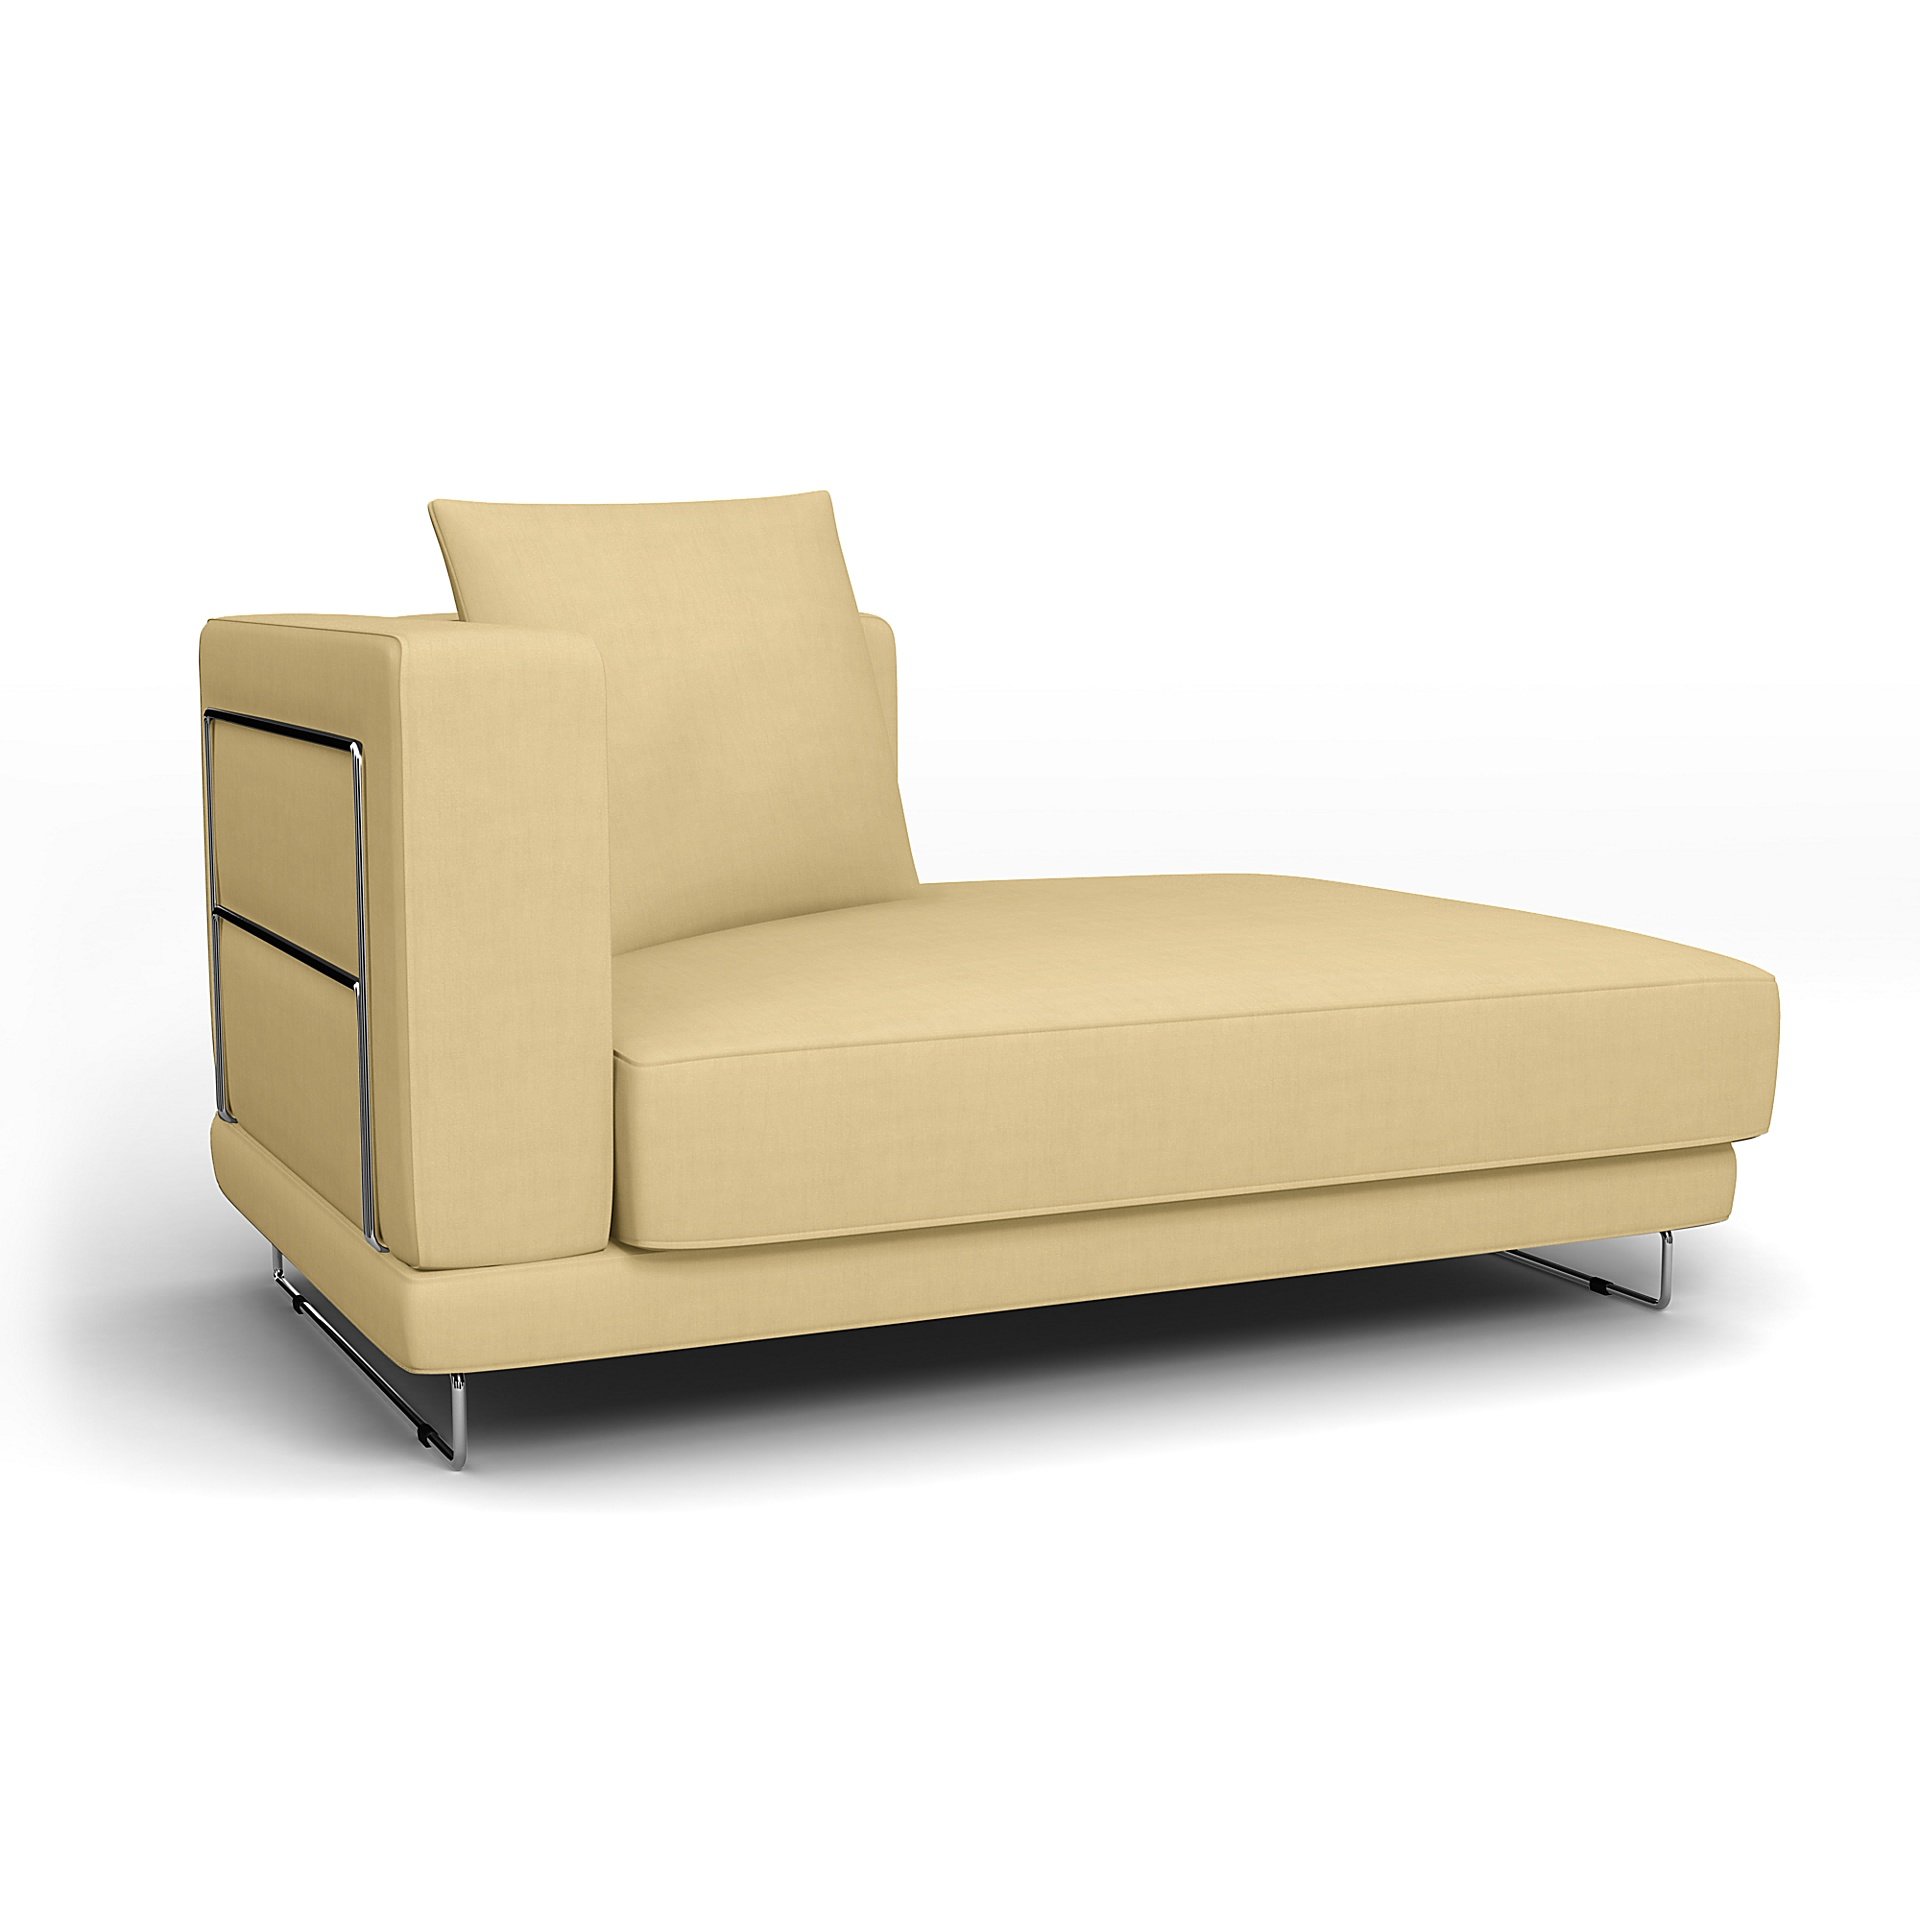 IKEA - Tylosand Chaise with Right Armrest Cover, Straw Yellow, Linen - Bemz